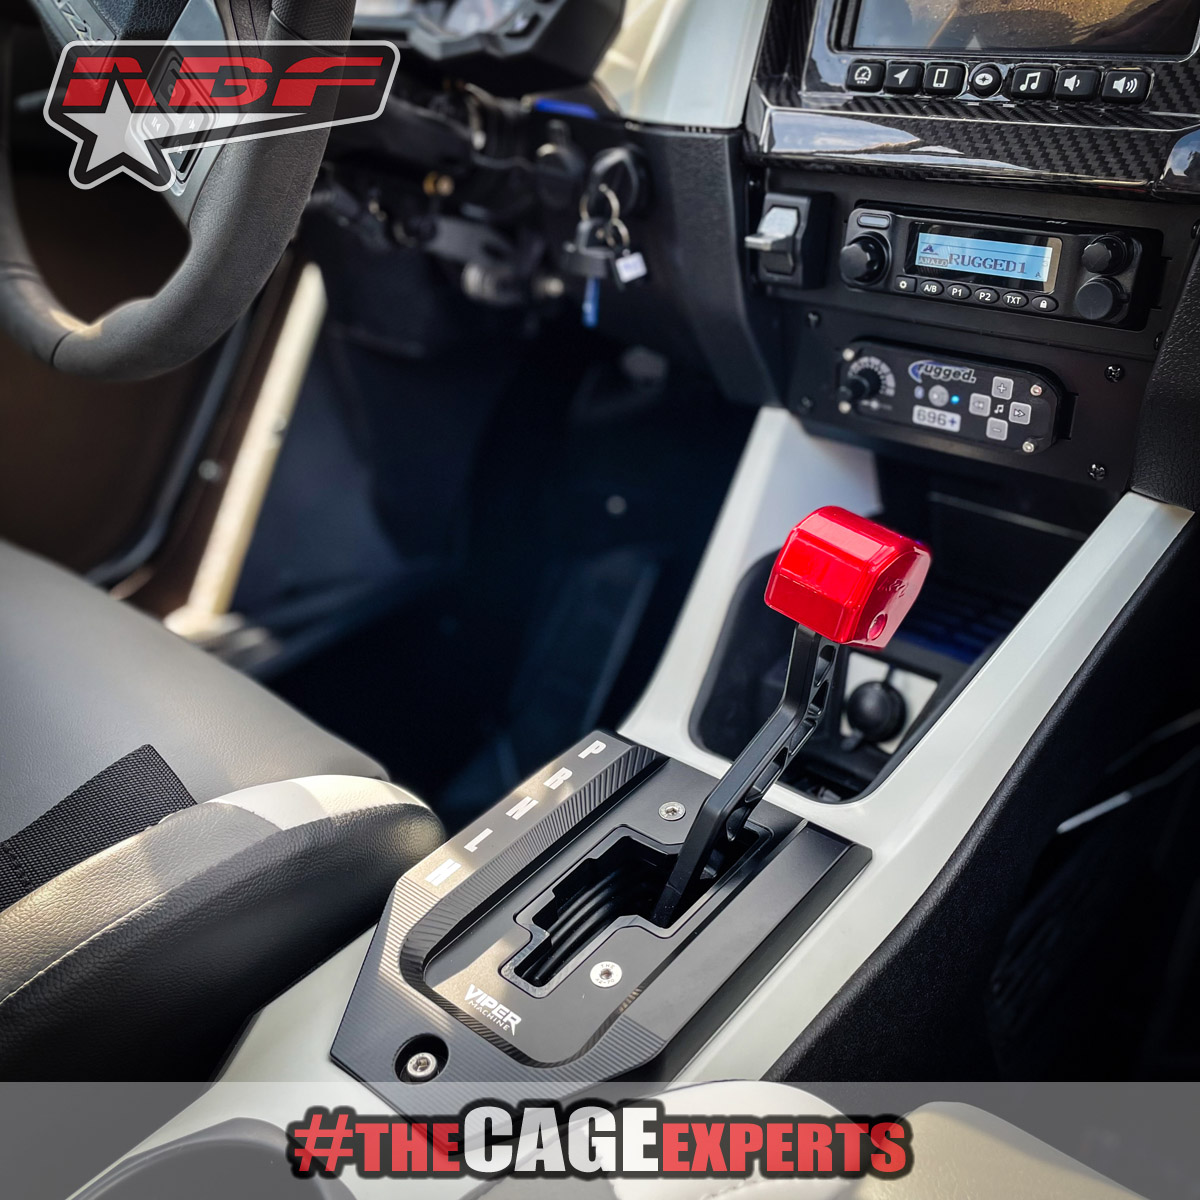 RZR Pro R Gated Viper Shift System